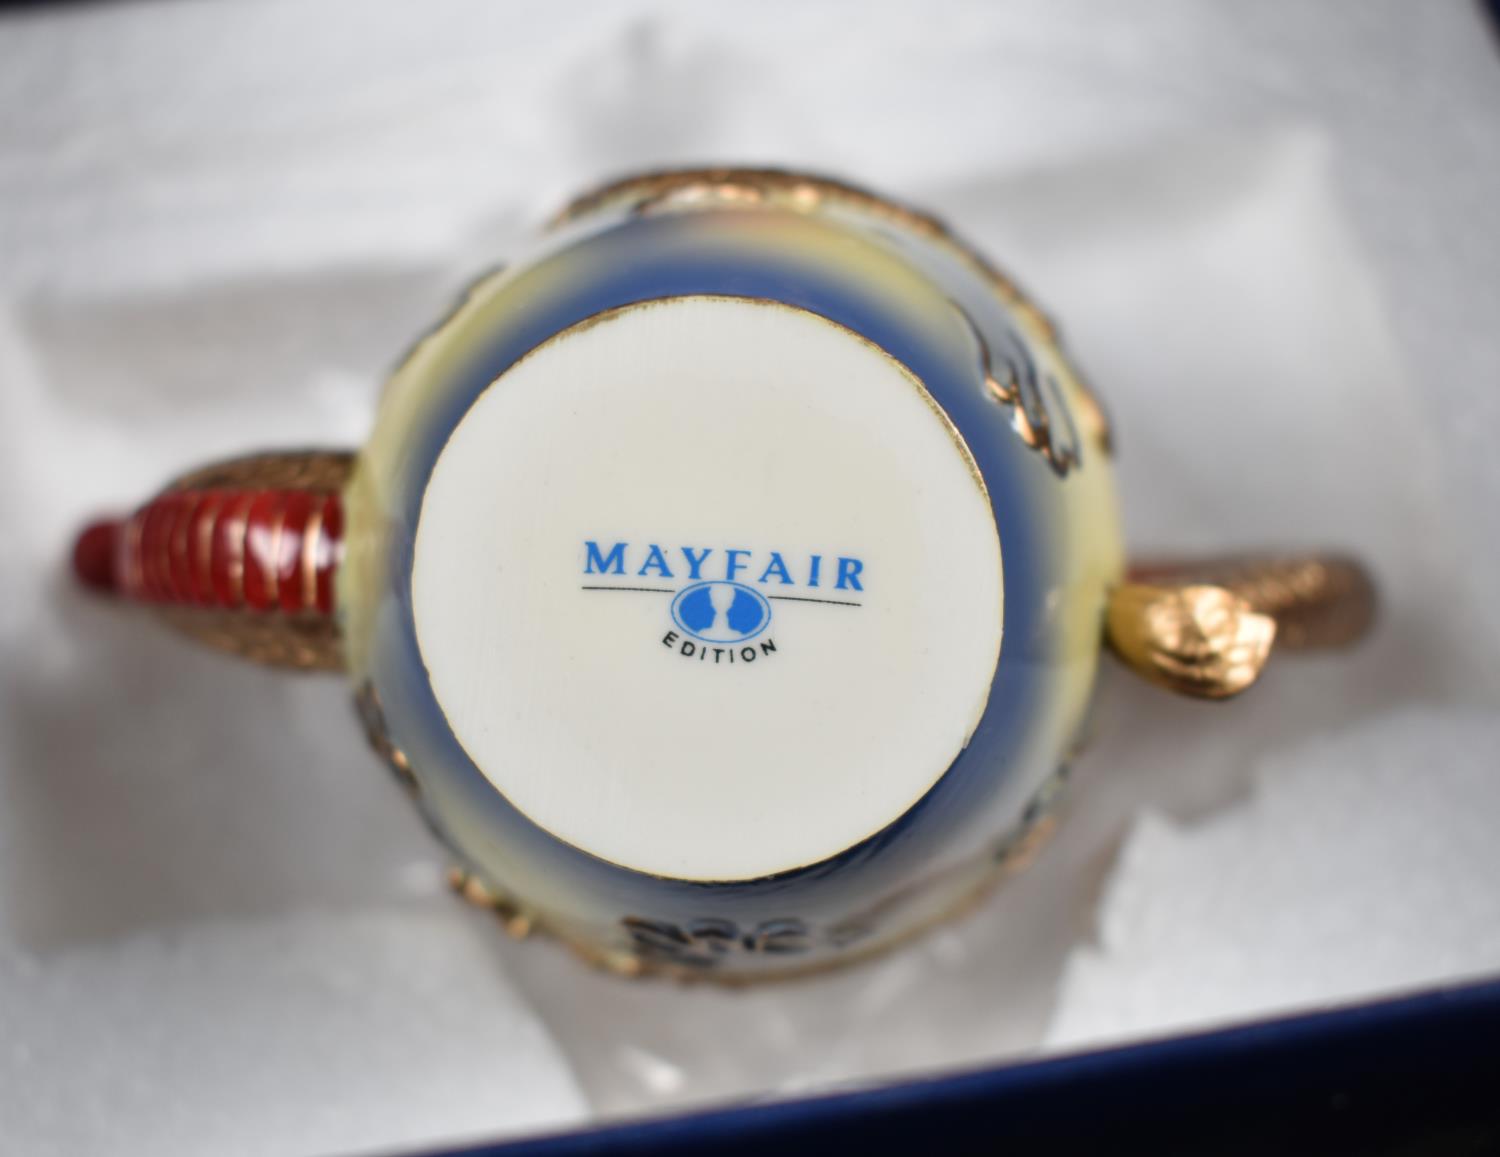 A Collection of Boxed Mayfair Teapots, The Connoisseurs Teapot Collection - Image 4 of 4